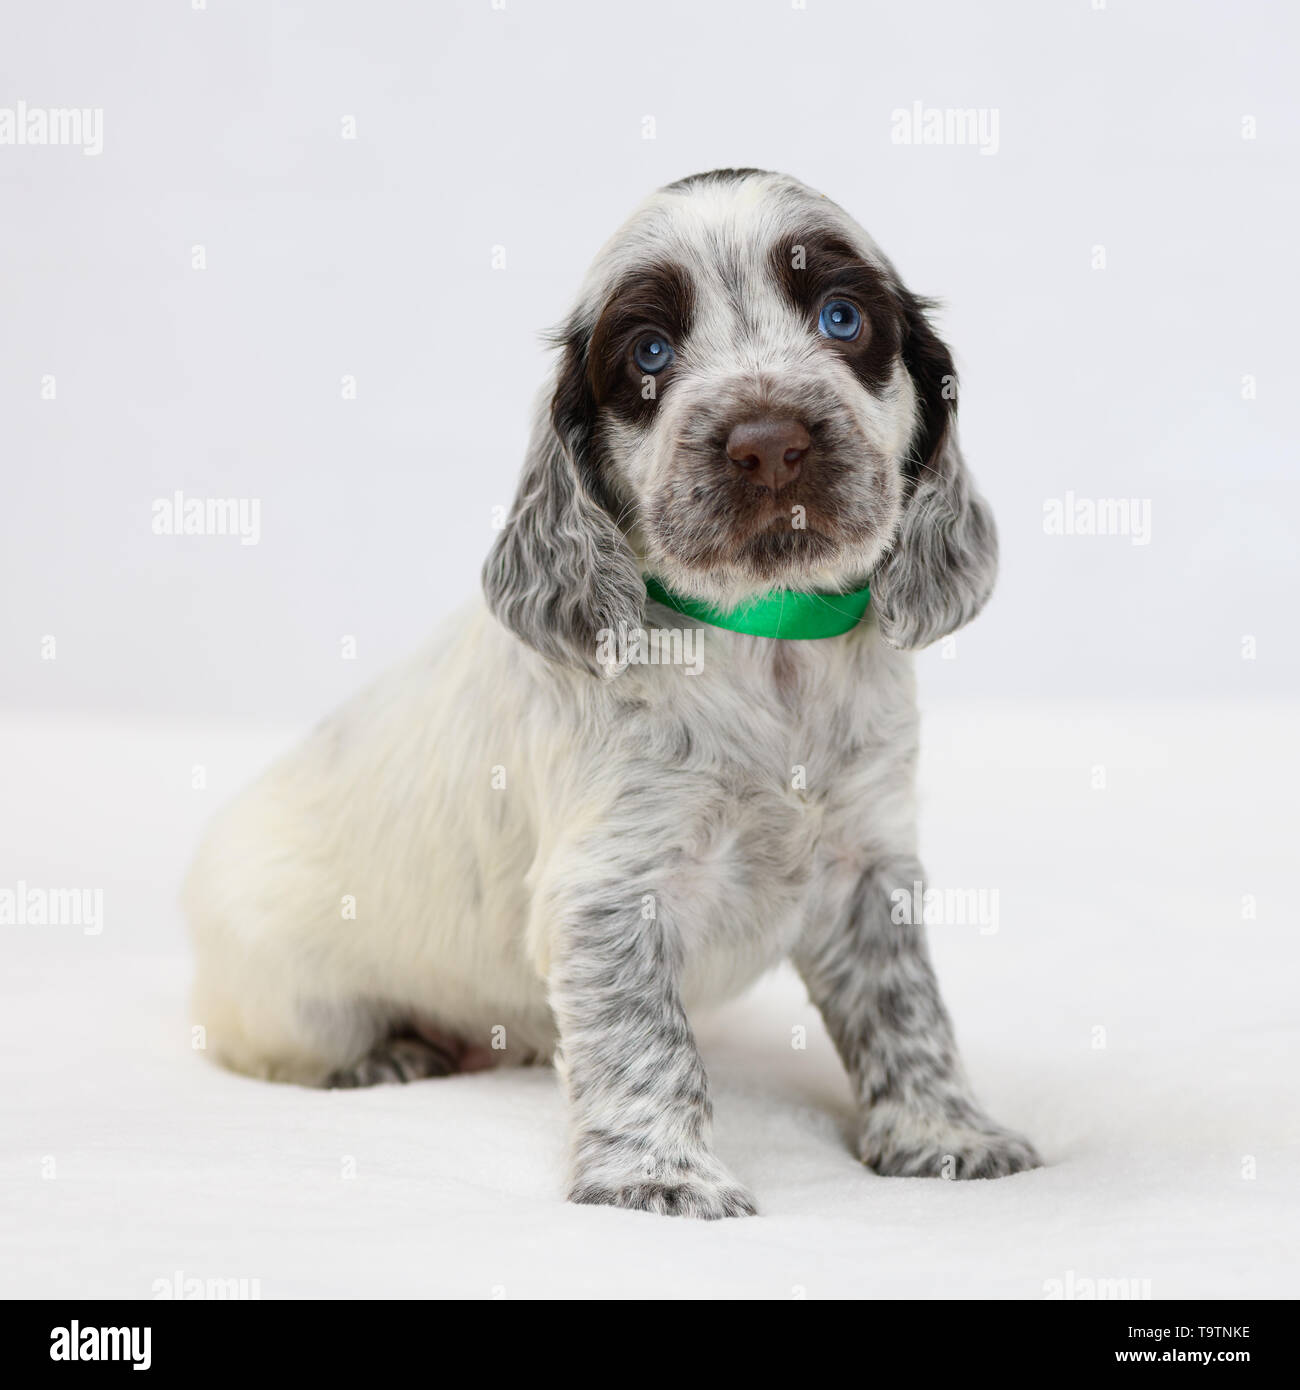 One little puppy with brown spots is sitting on the plaid in indoors. Stock Photo